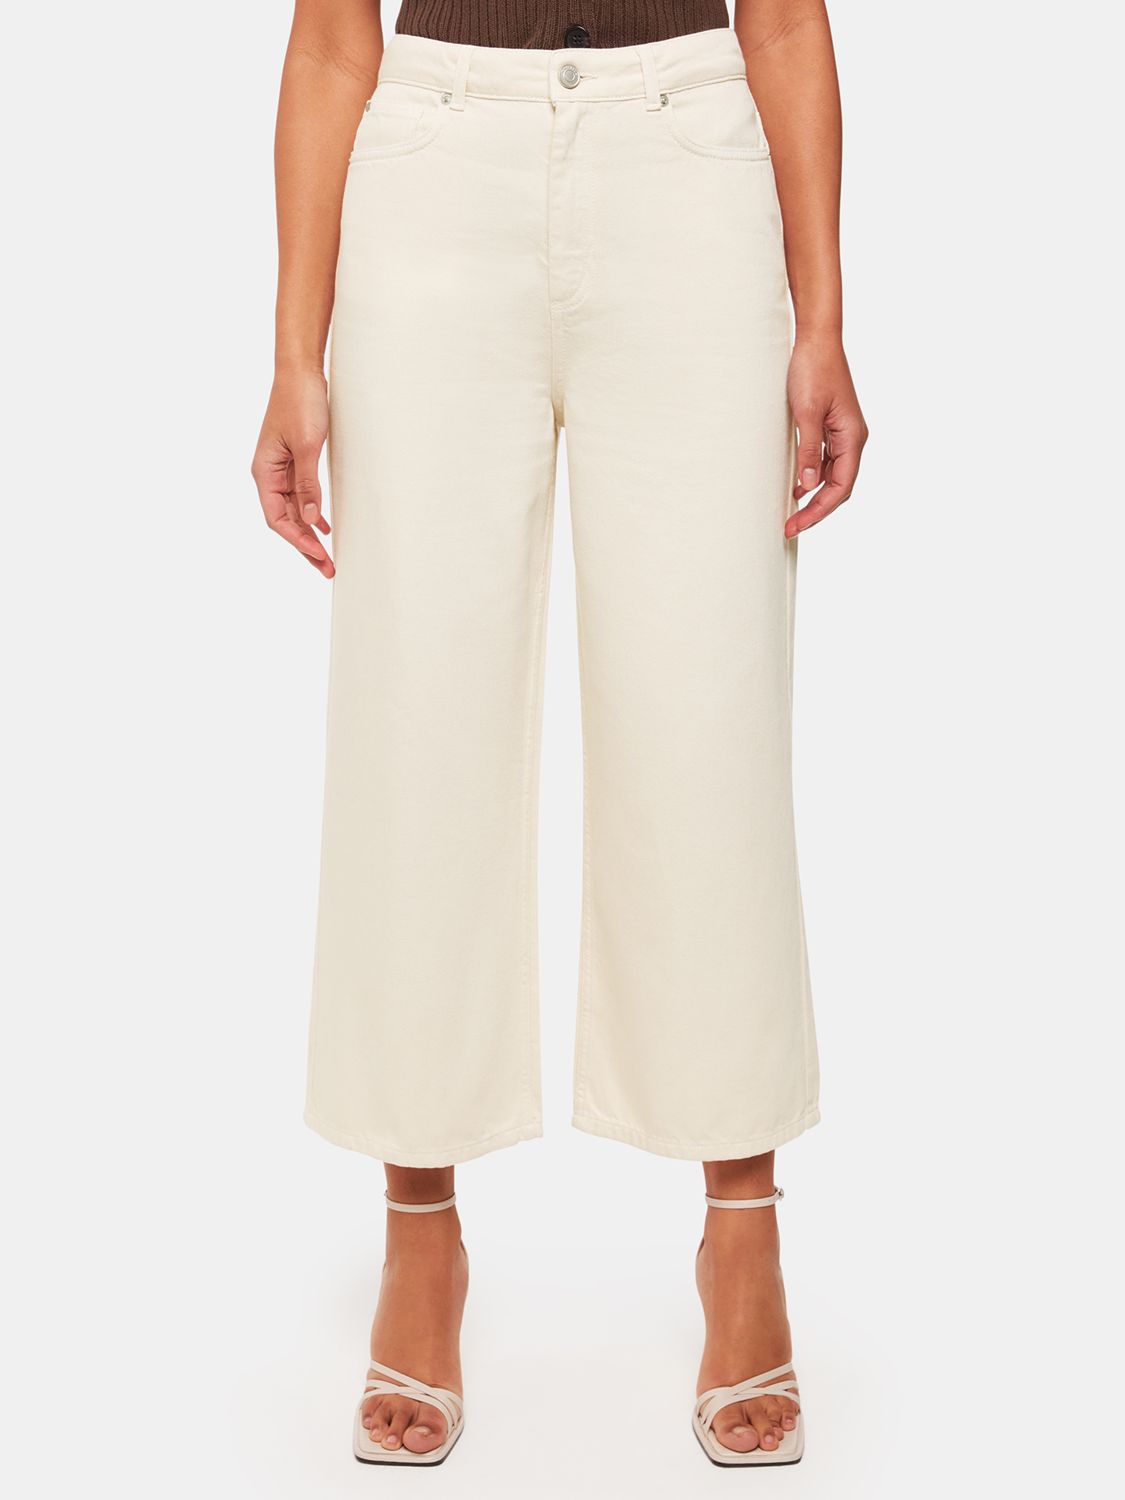 Buy Whistles Wide Leg Cropped Jeans, White Online at johnlewis.com